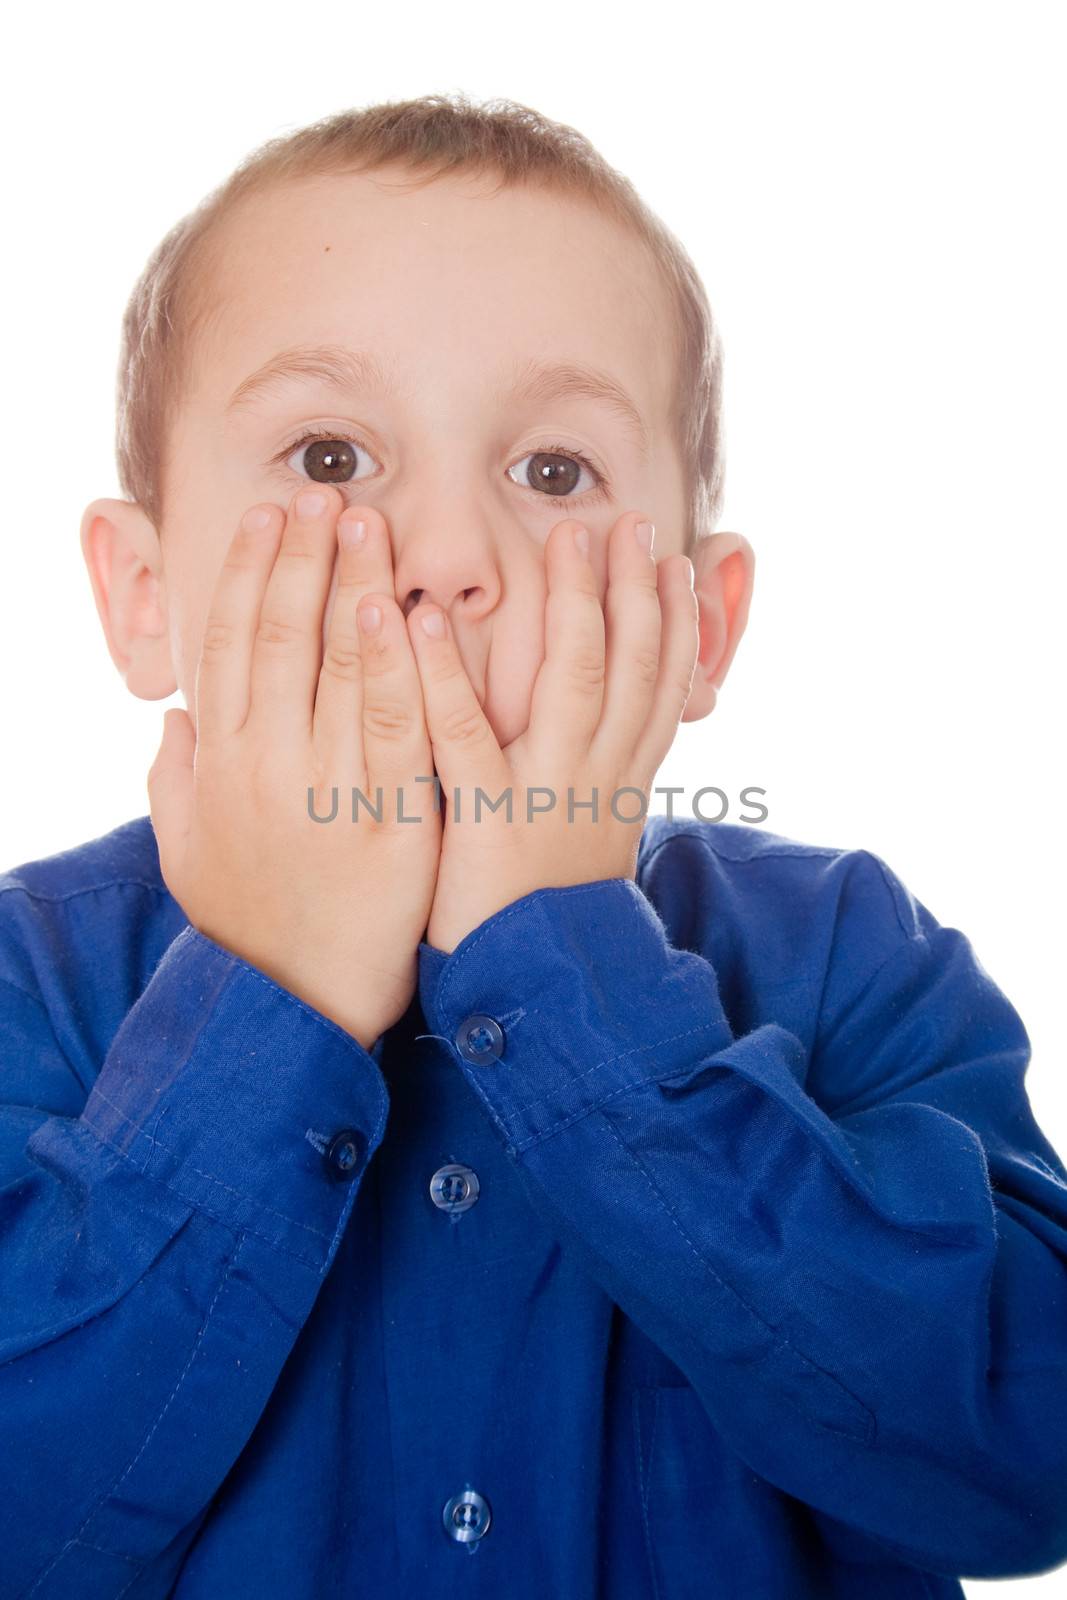  Boy with surprised or shocked expression isolated on white background